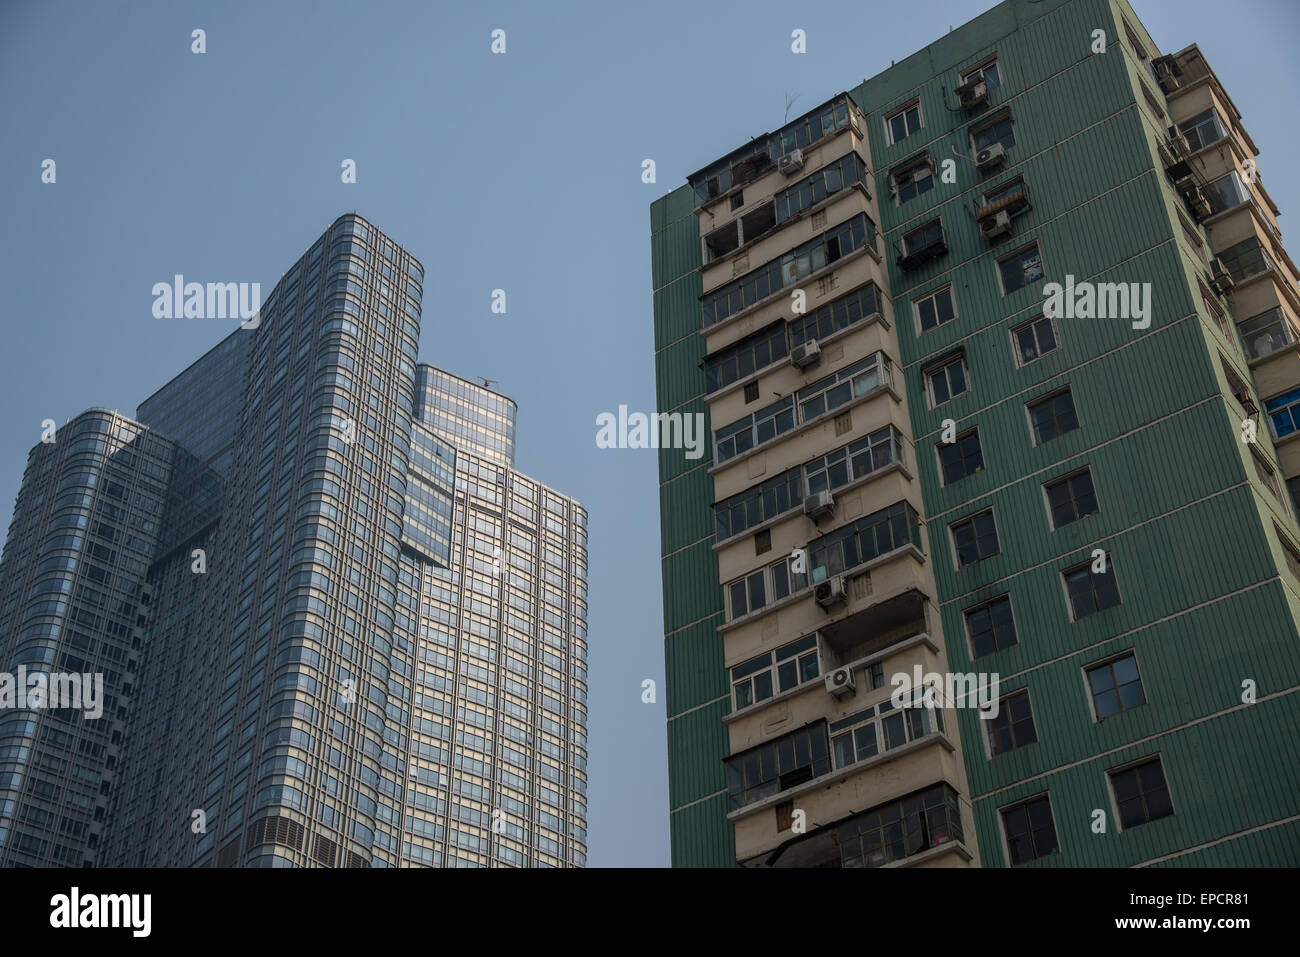 central business district of beijing china Stock Photo